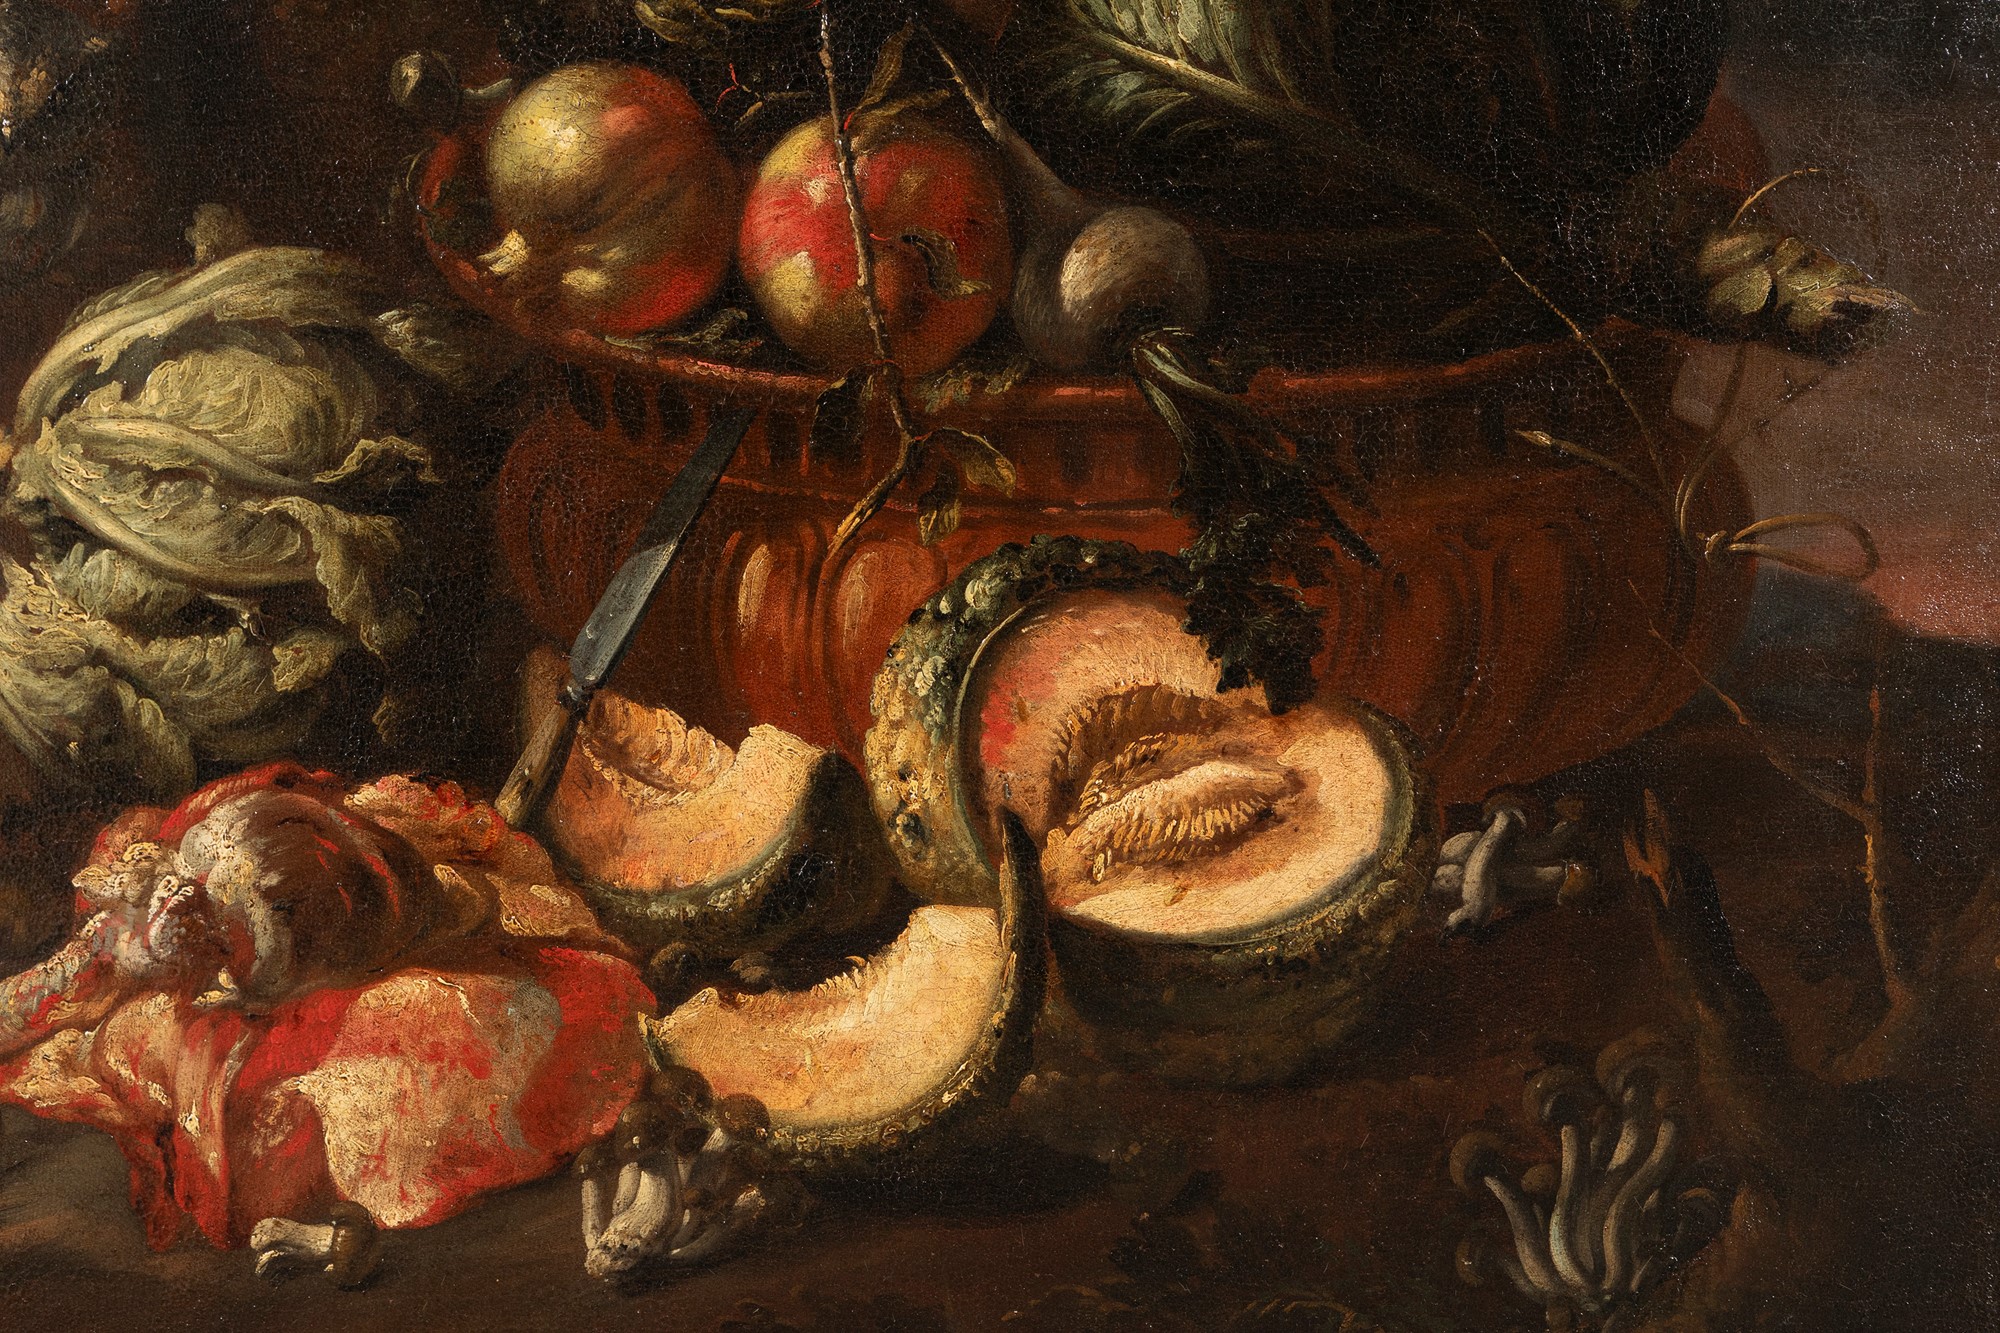 Felice Boselli (Piacenza 1650-Parma 1732) - Entrails, vegetables and fruits with a owl - Image 3 of 7